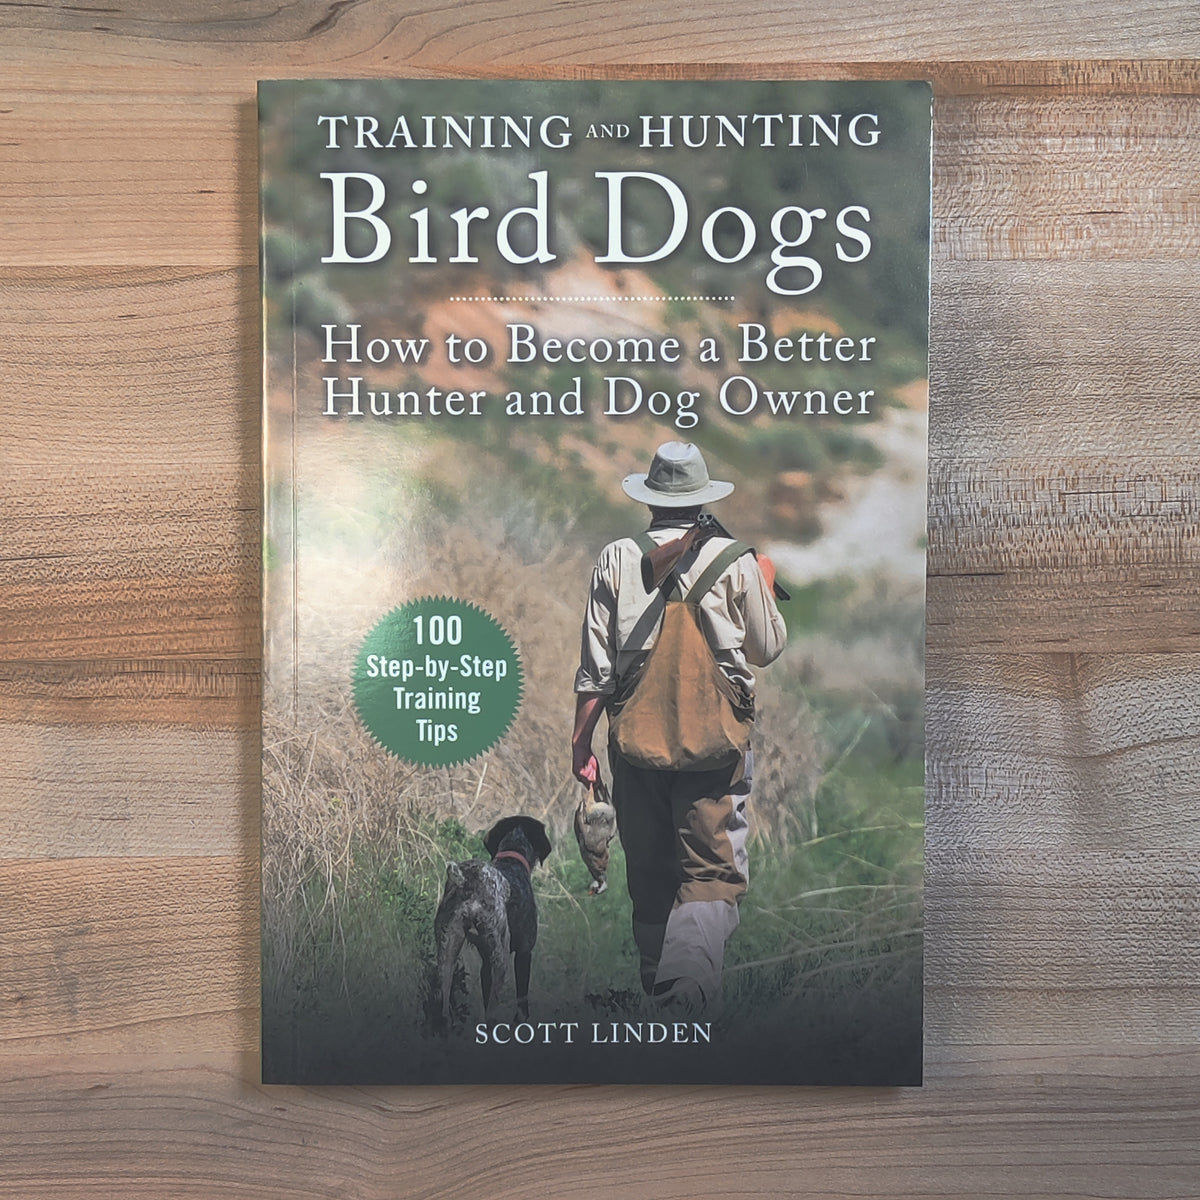 Training and Hunting Bird Dogs: How to Become a Better Hunter and Dog Owner - Scott Linden